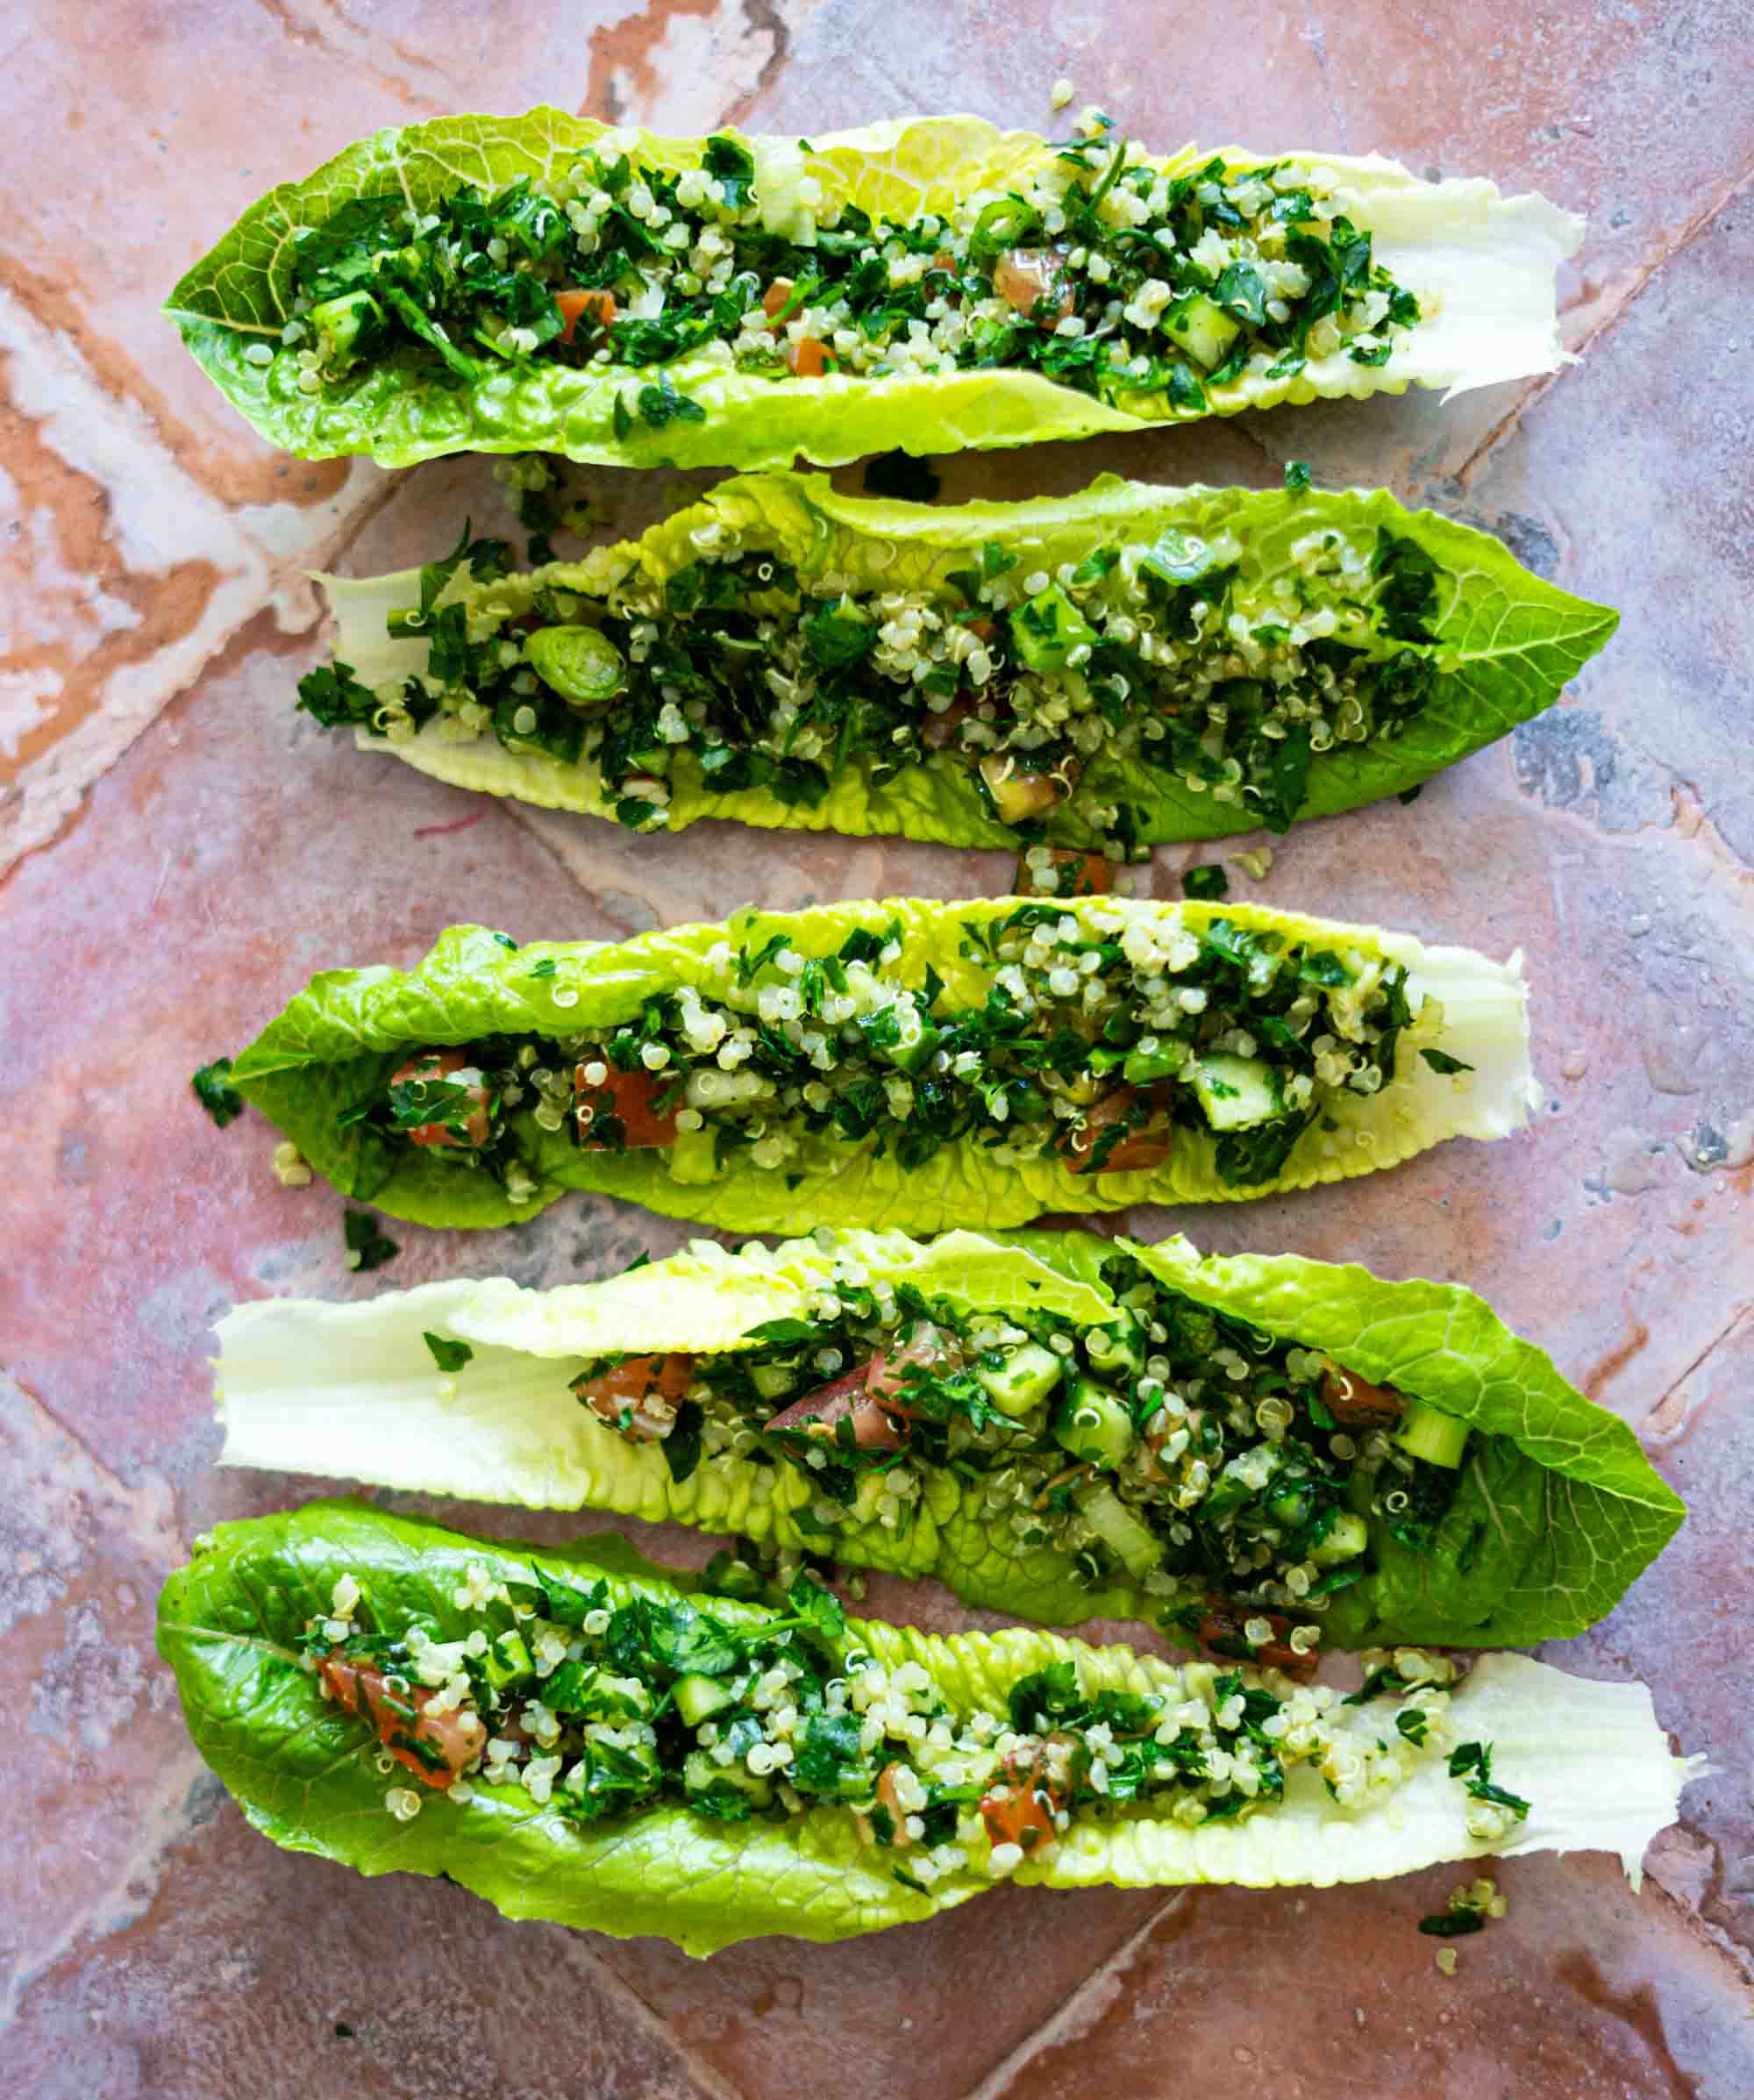 Roman lettuce boats filled with tabbouleh.